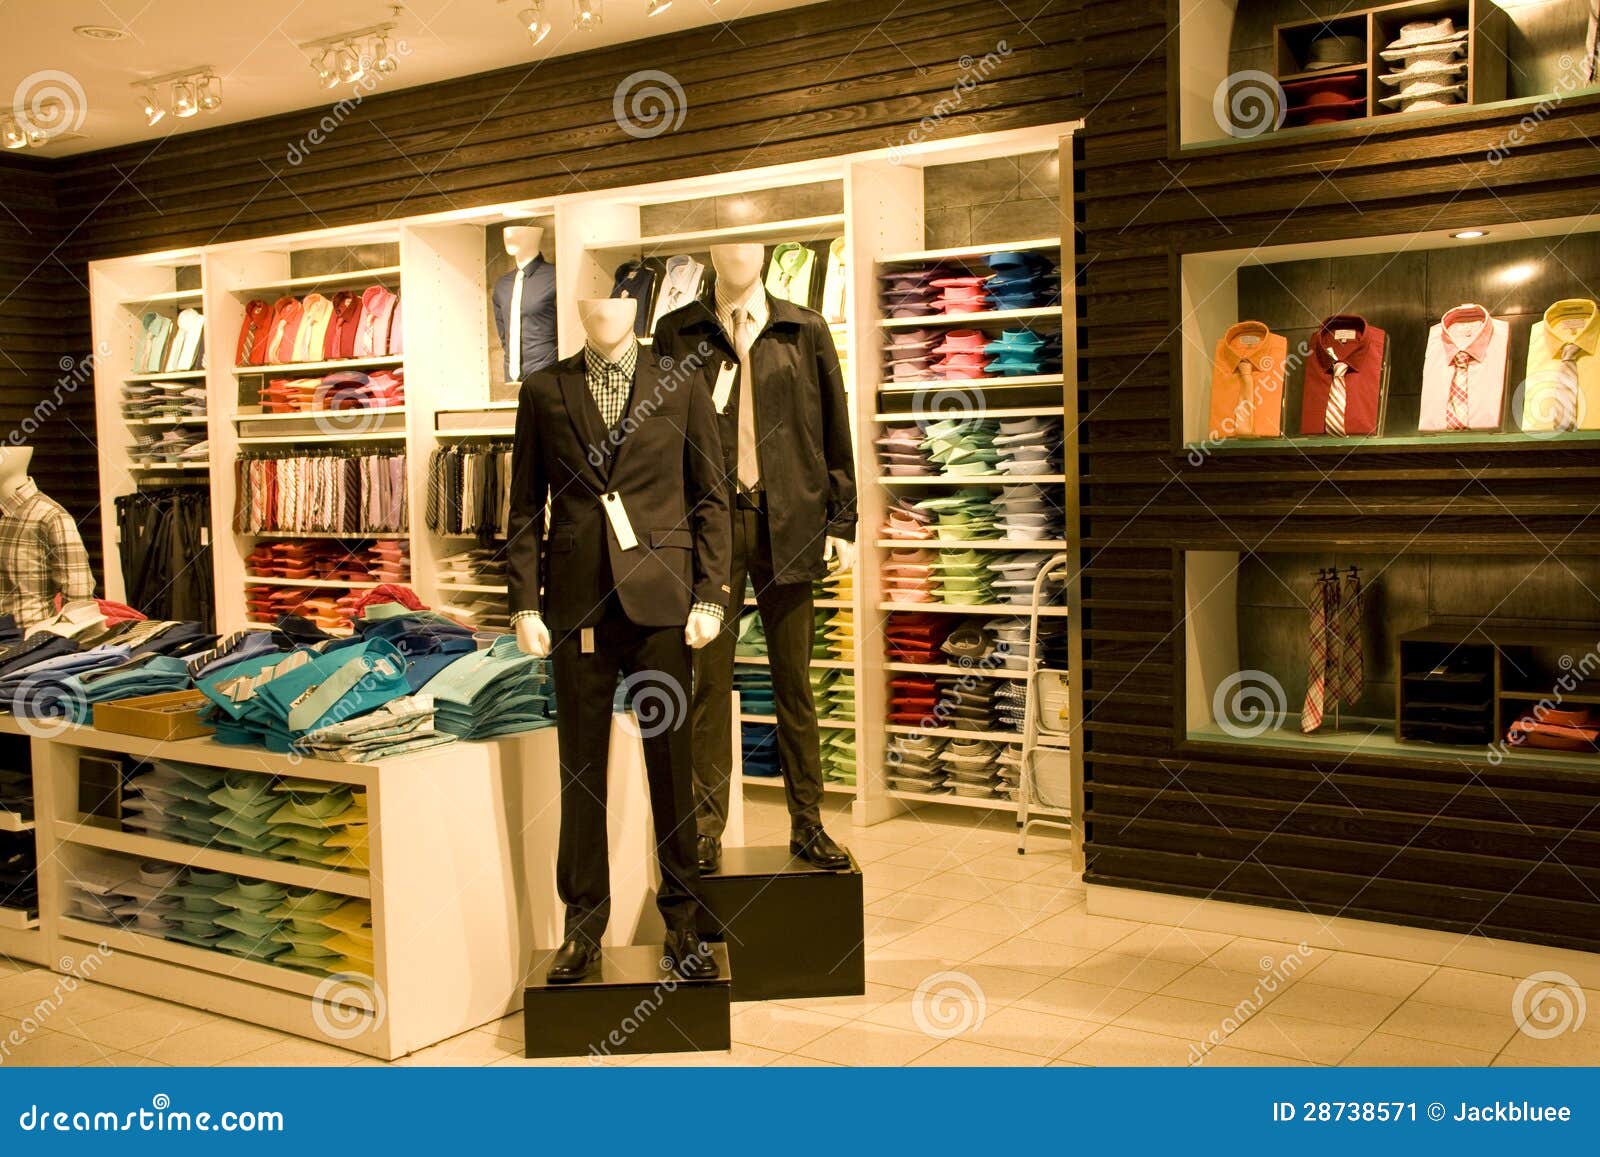 Stylish Man Clothing in Store Stock Image - Image of mall, store: 28738571